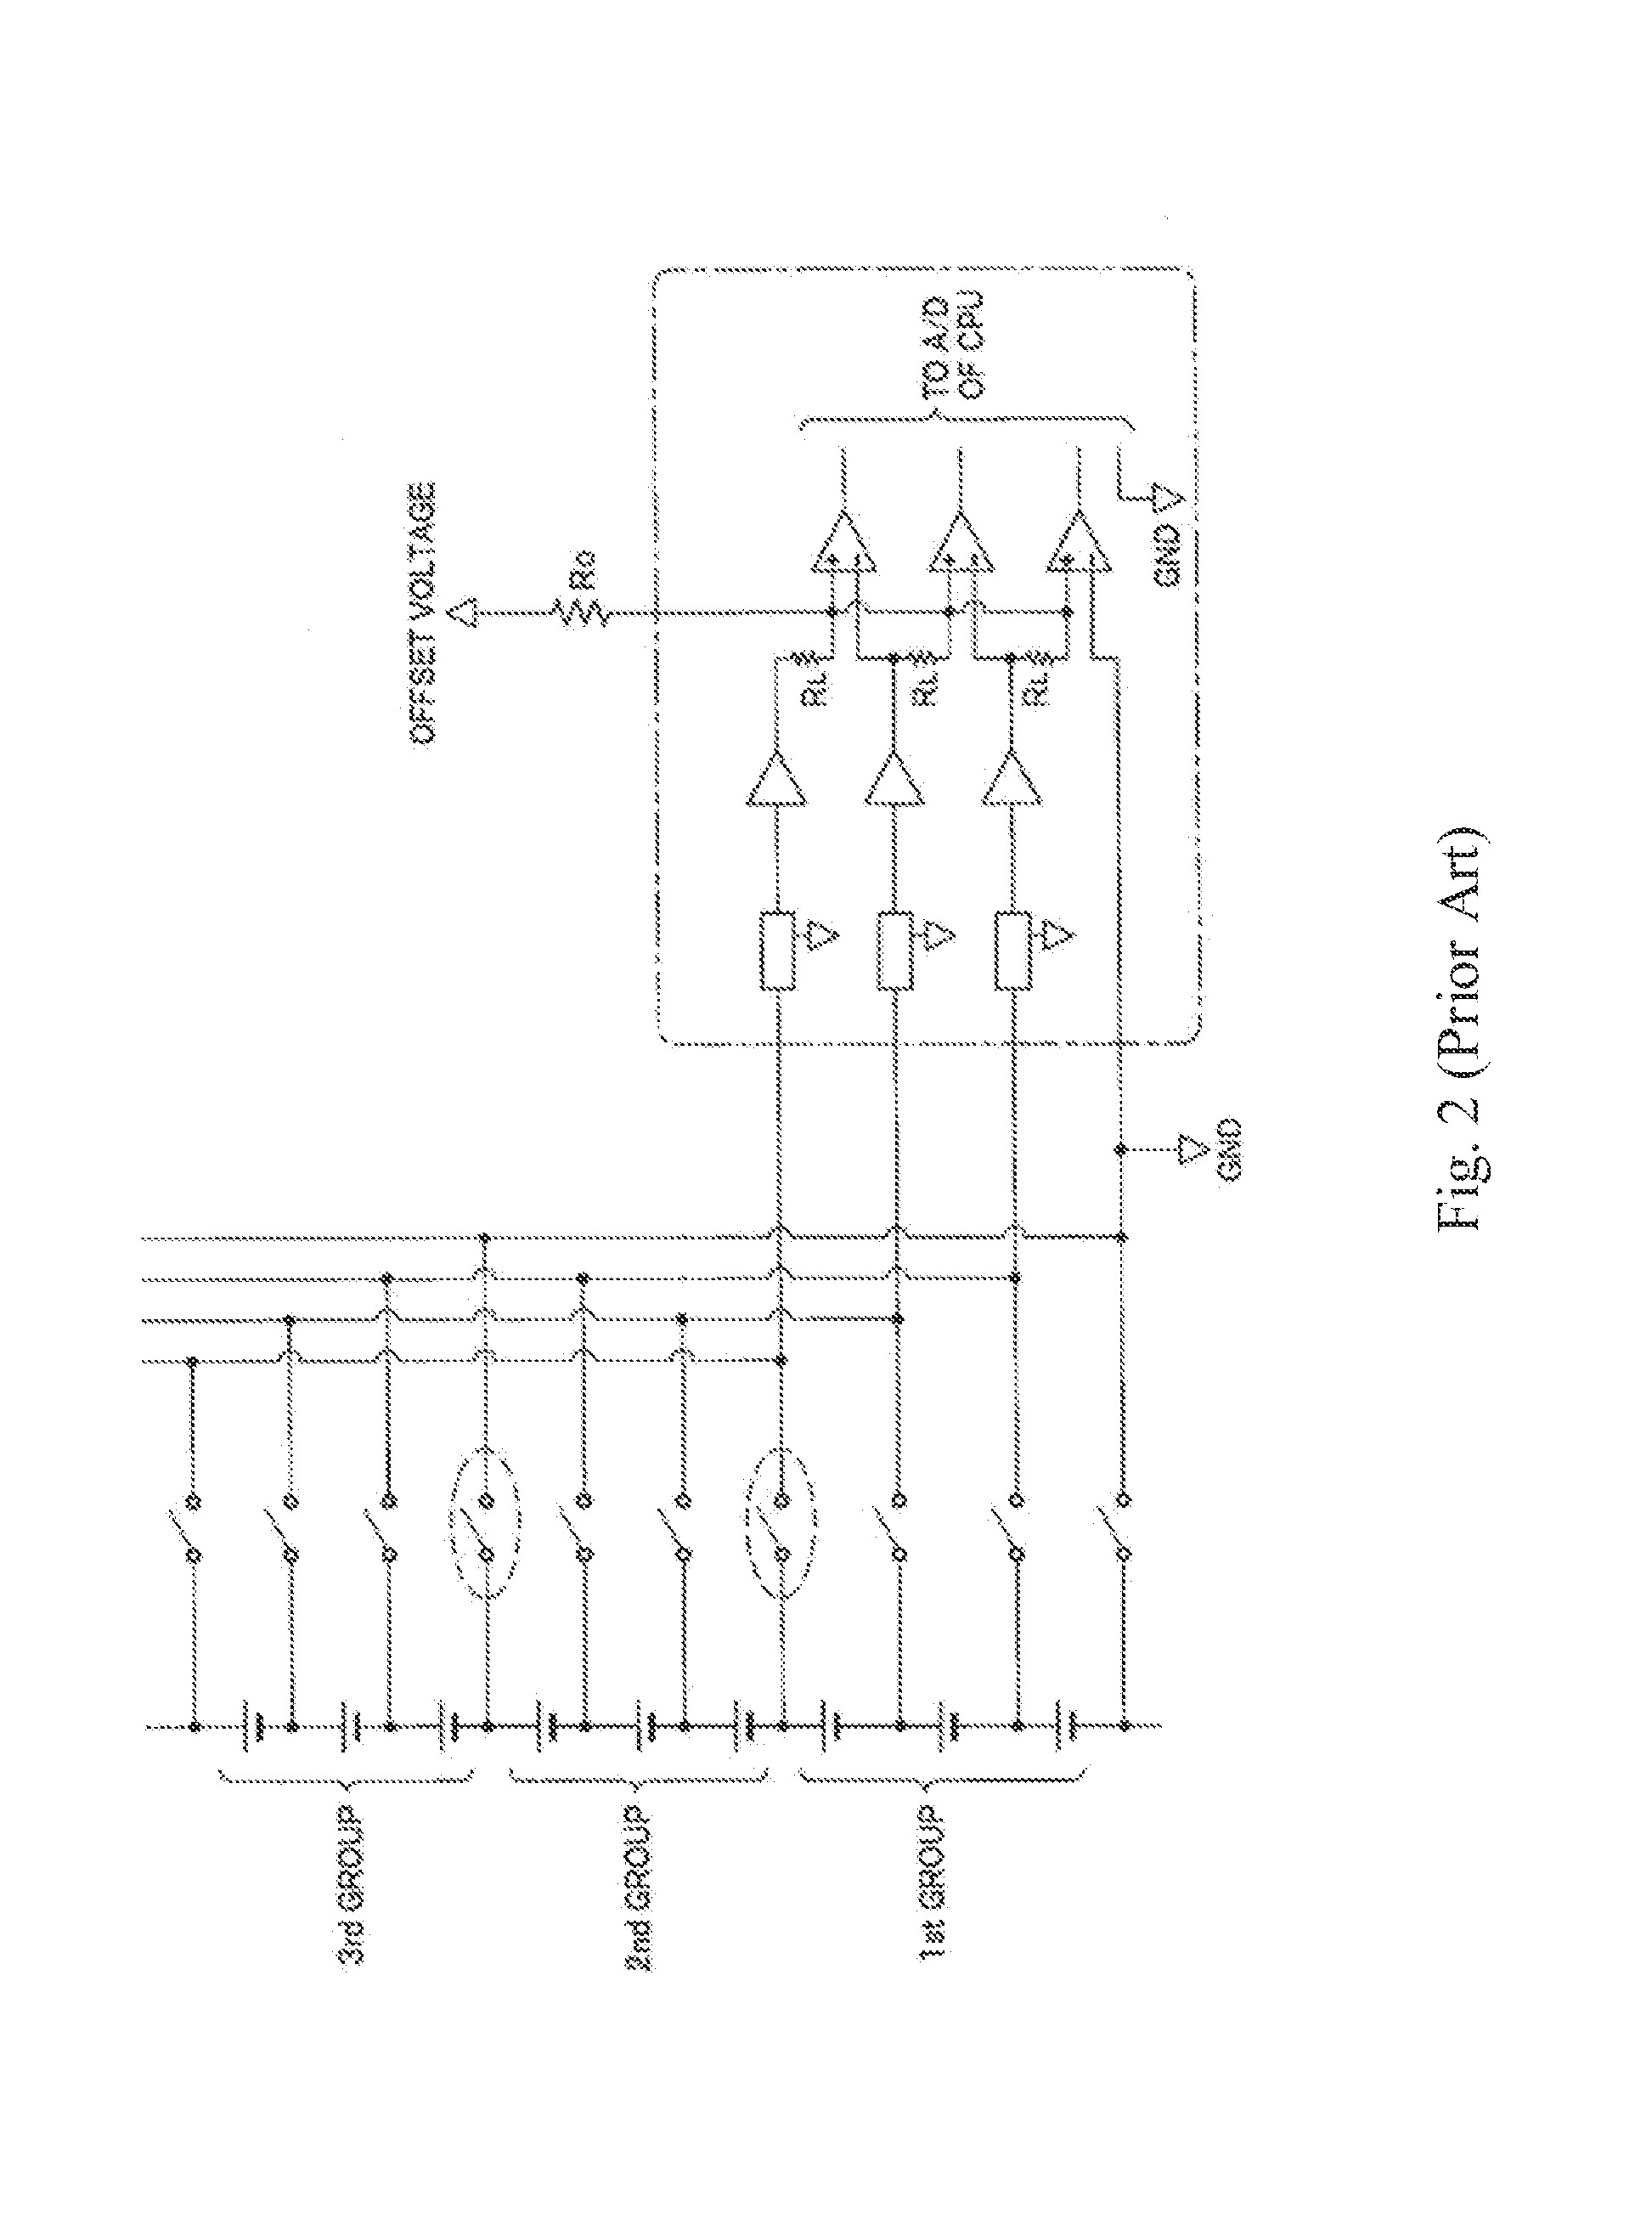 Cell voltage monitoring and self-calibrating device